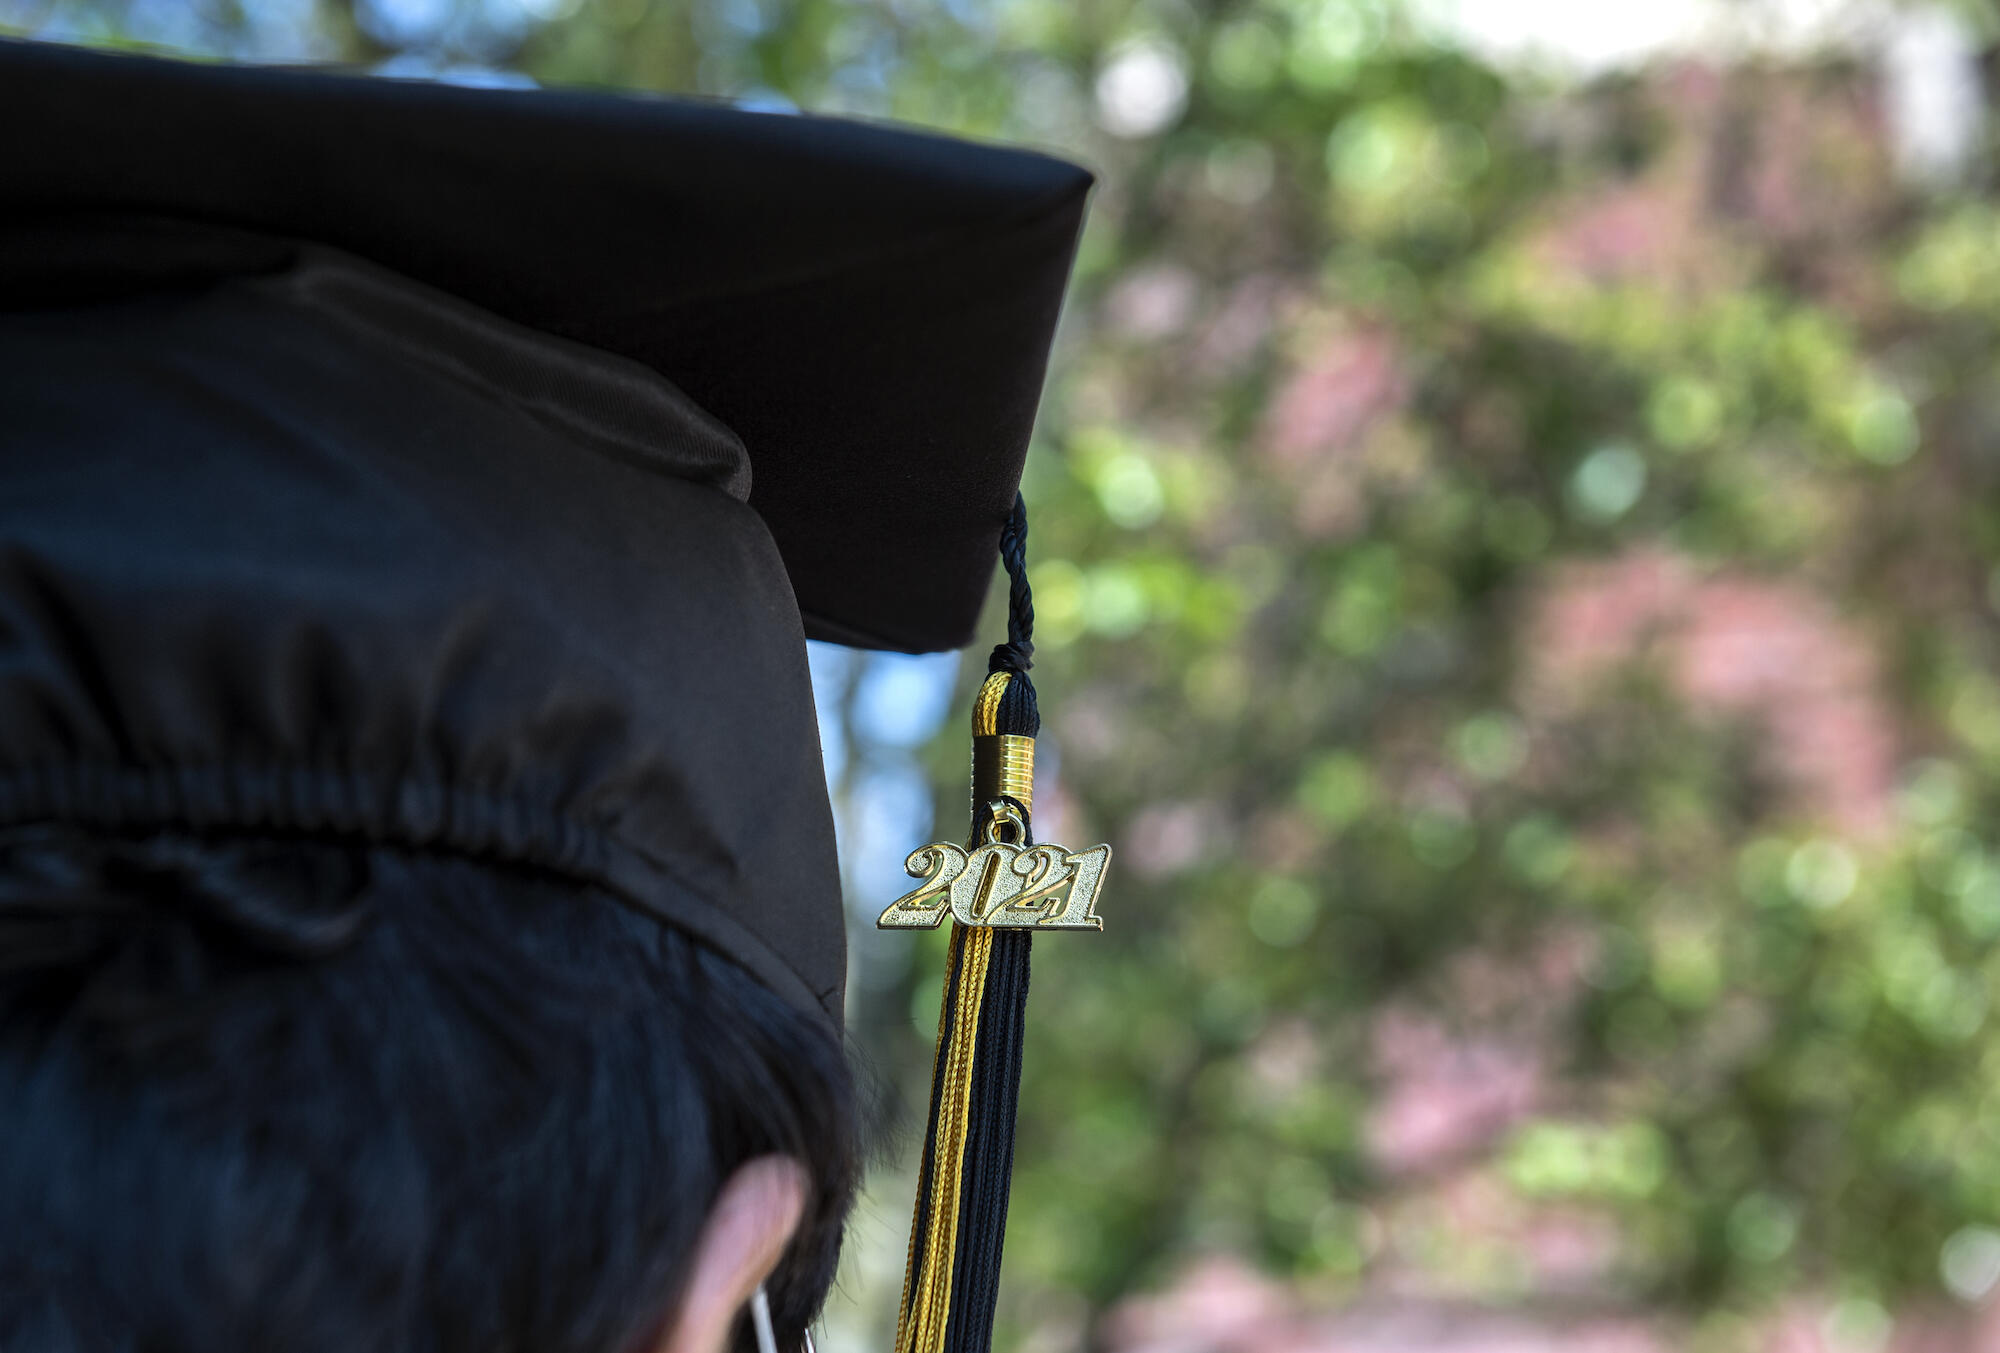 close-up photo of a person wearing a graduation cap